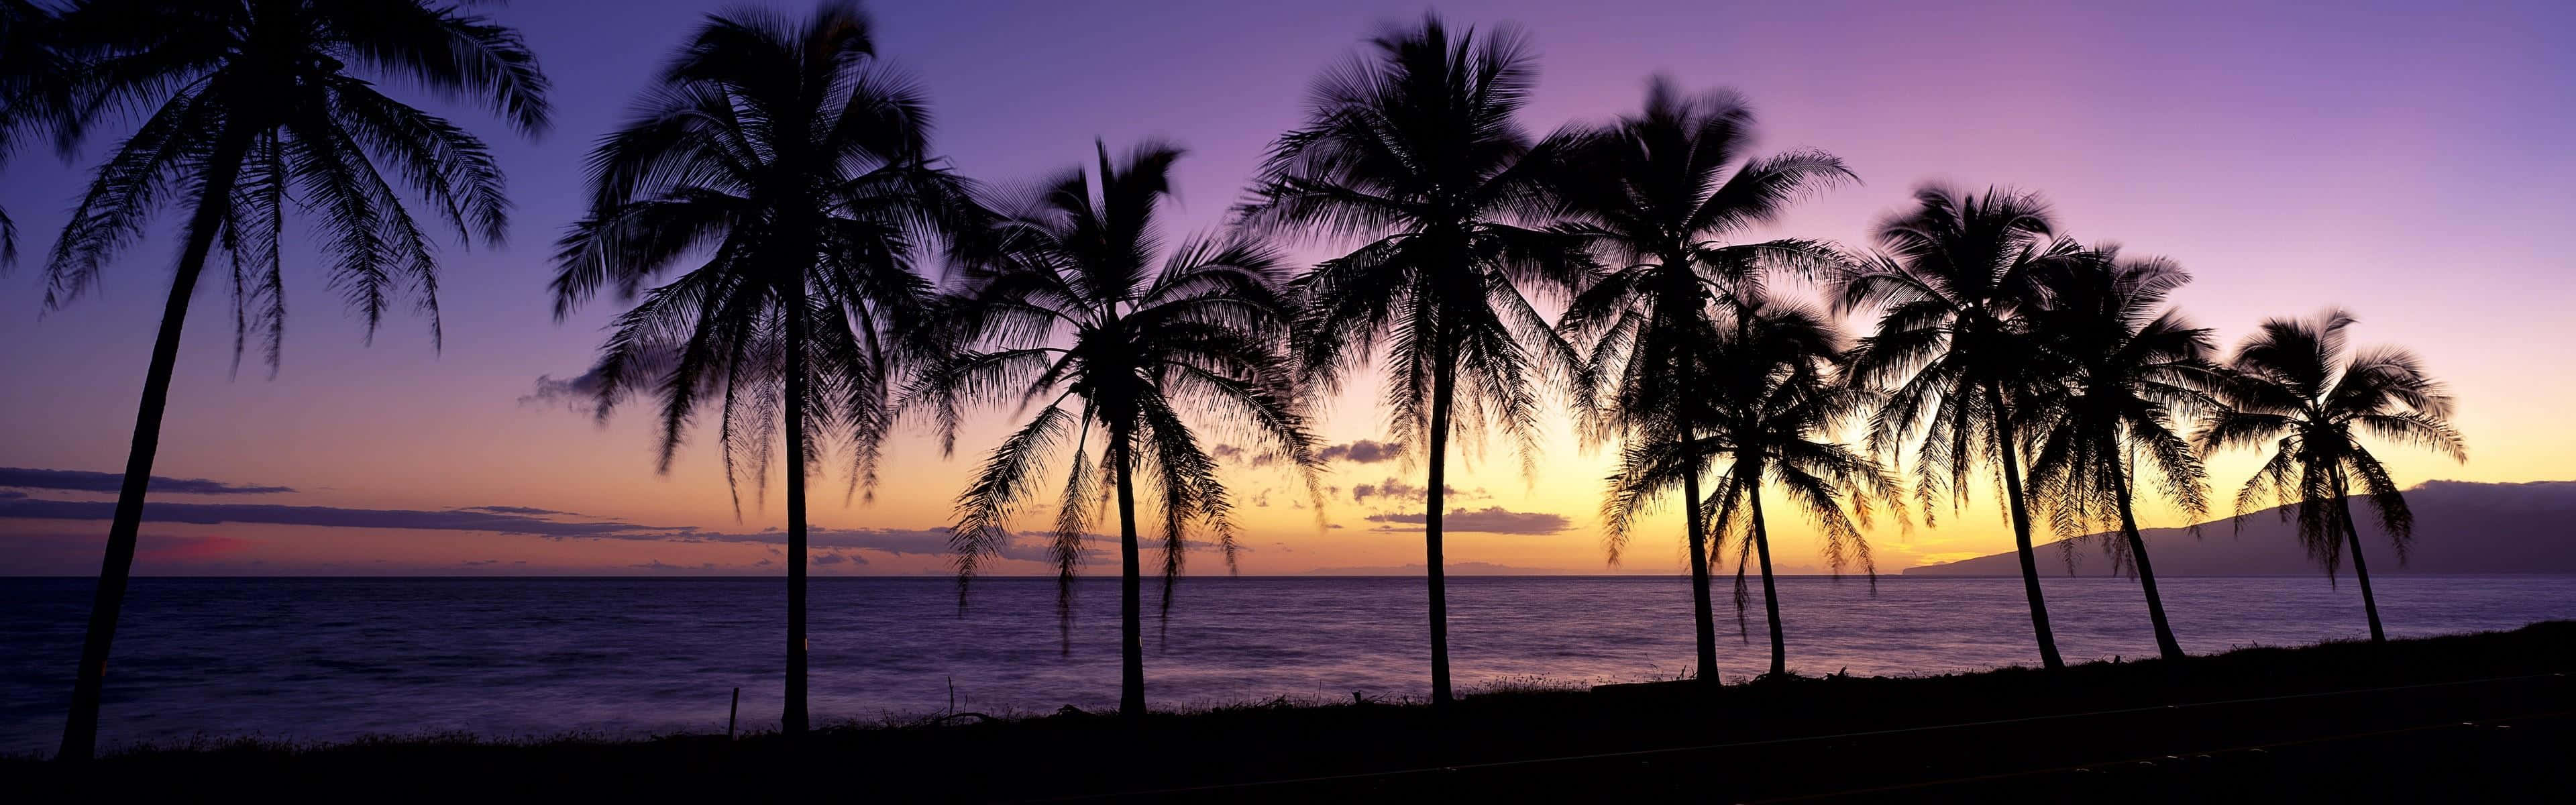 Purple Sky And Palm Trees As A Panoramic Desktop Wallpaper